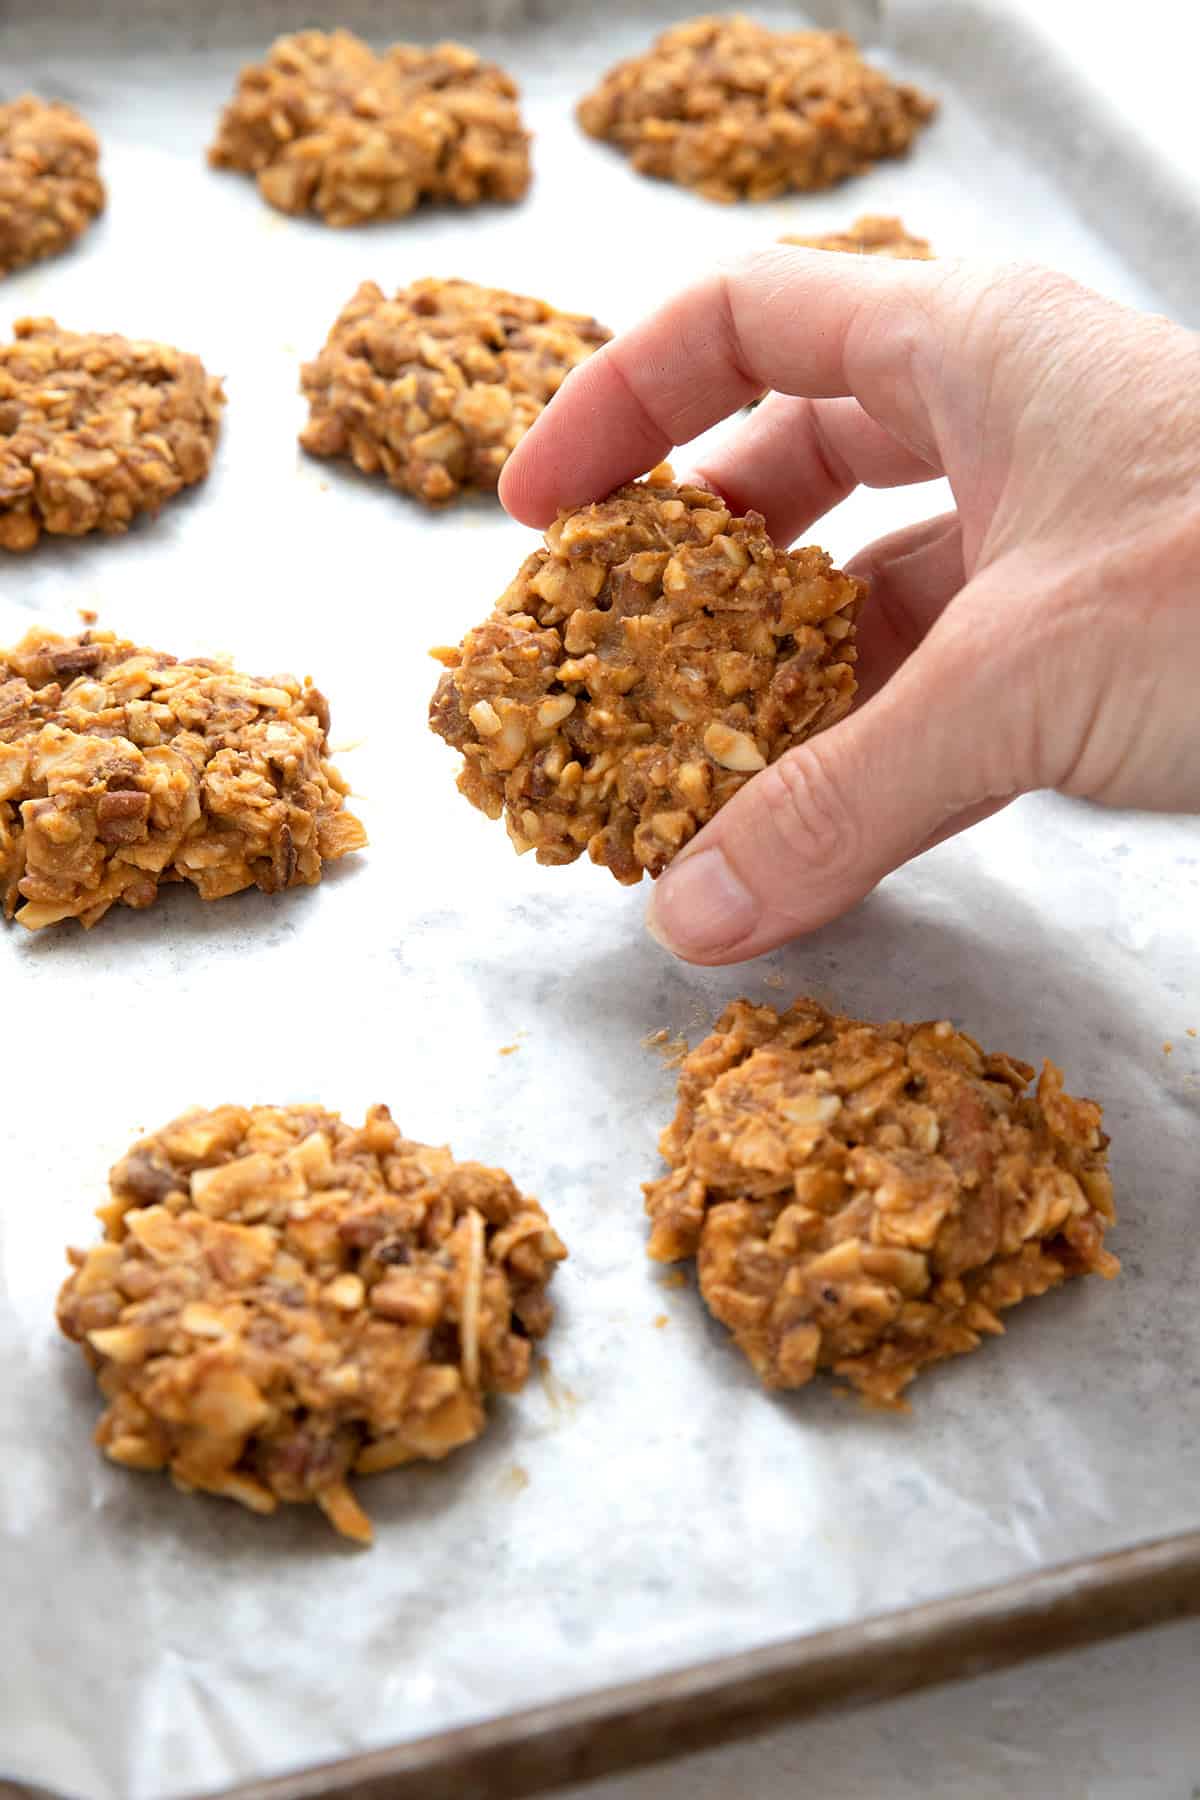 A hand lifting a keto no bake cookie from a cookie tray.